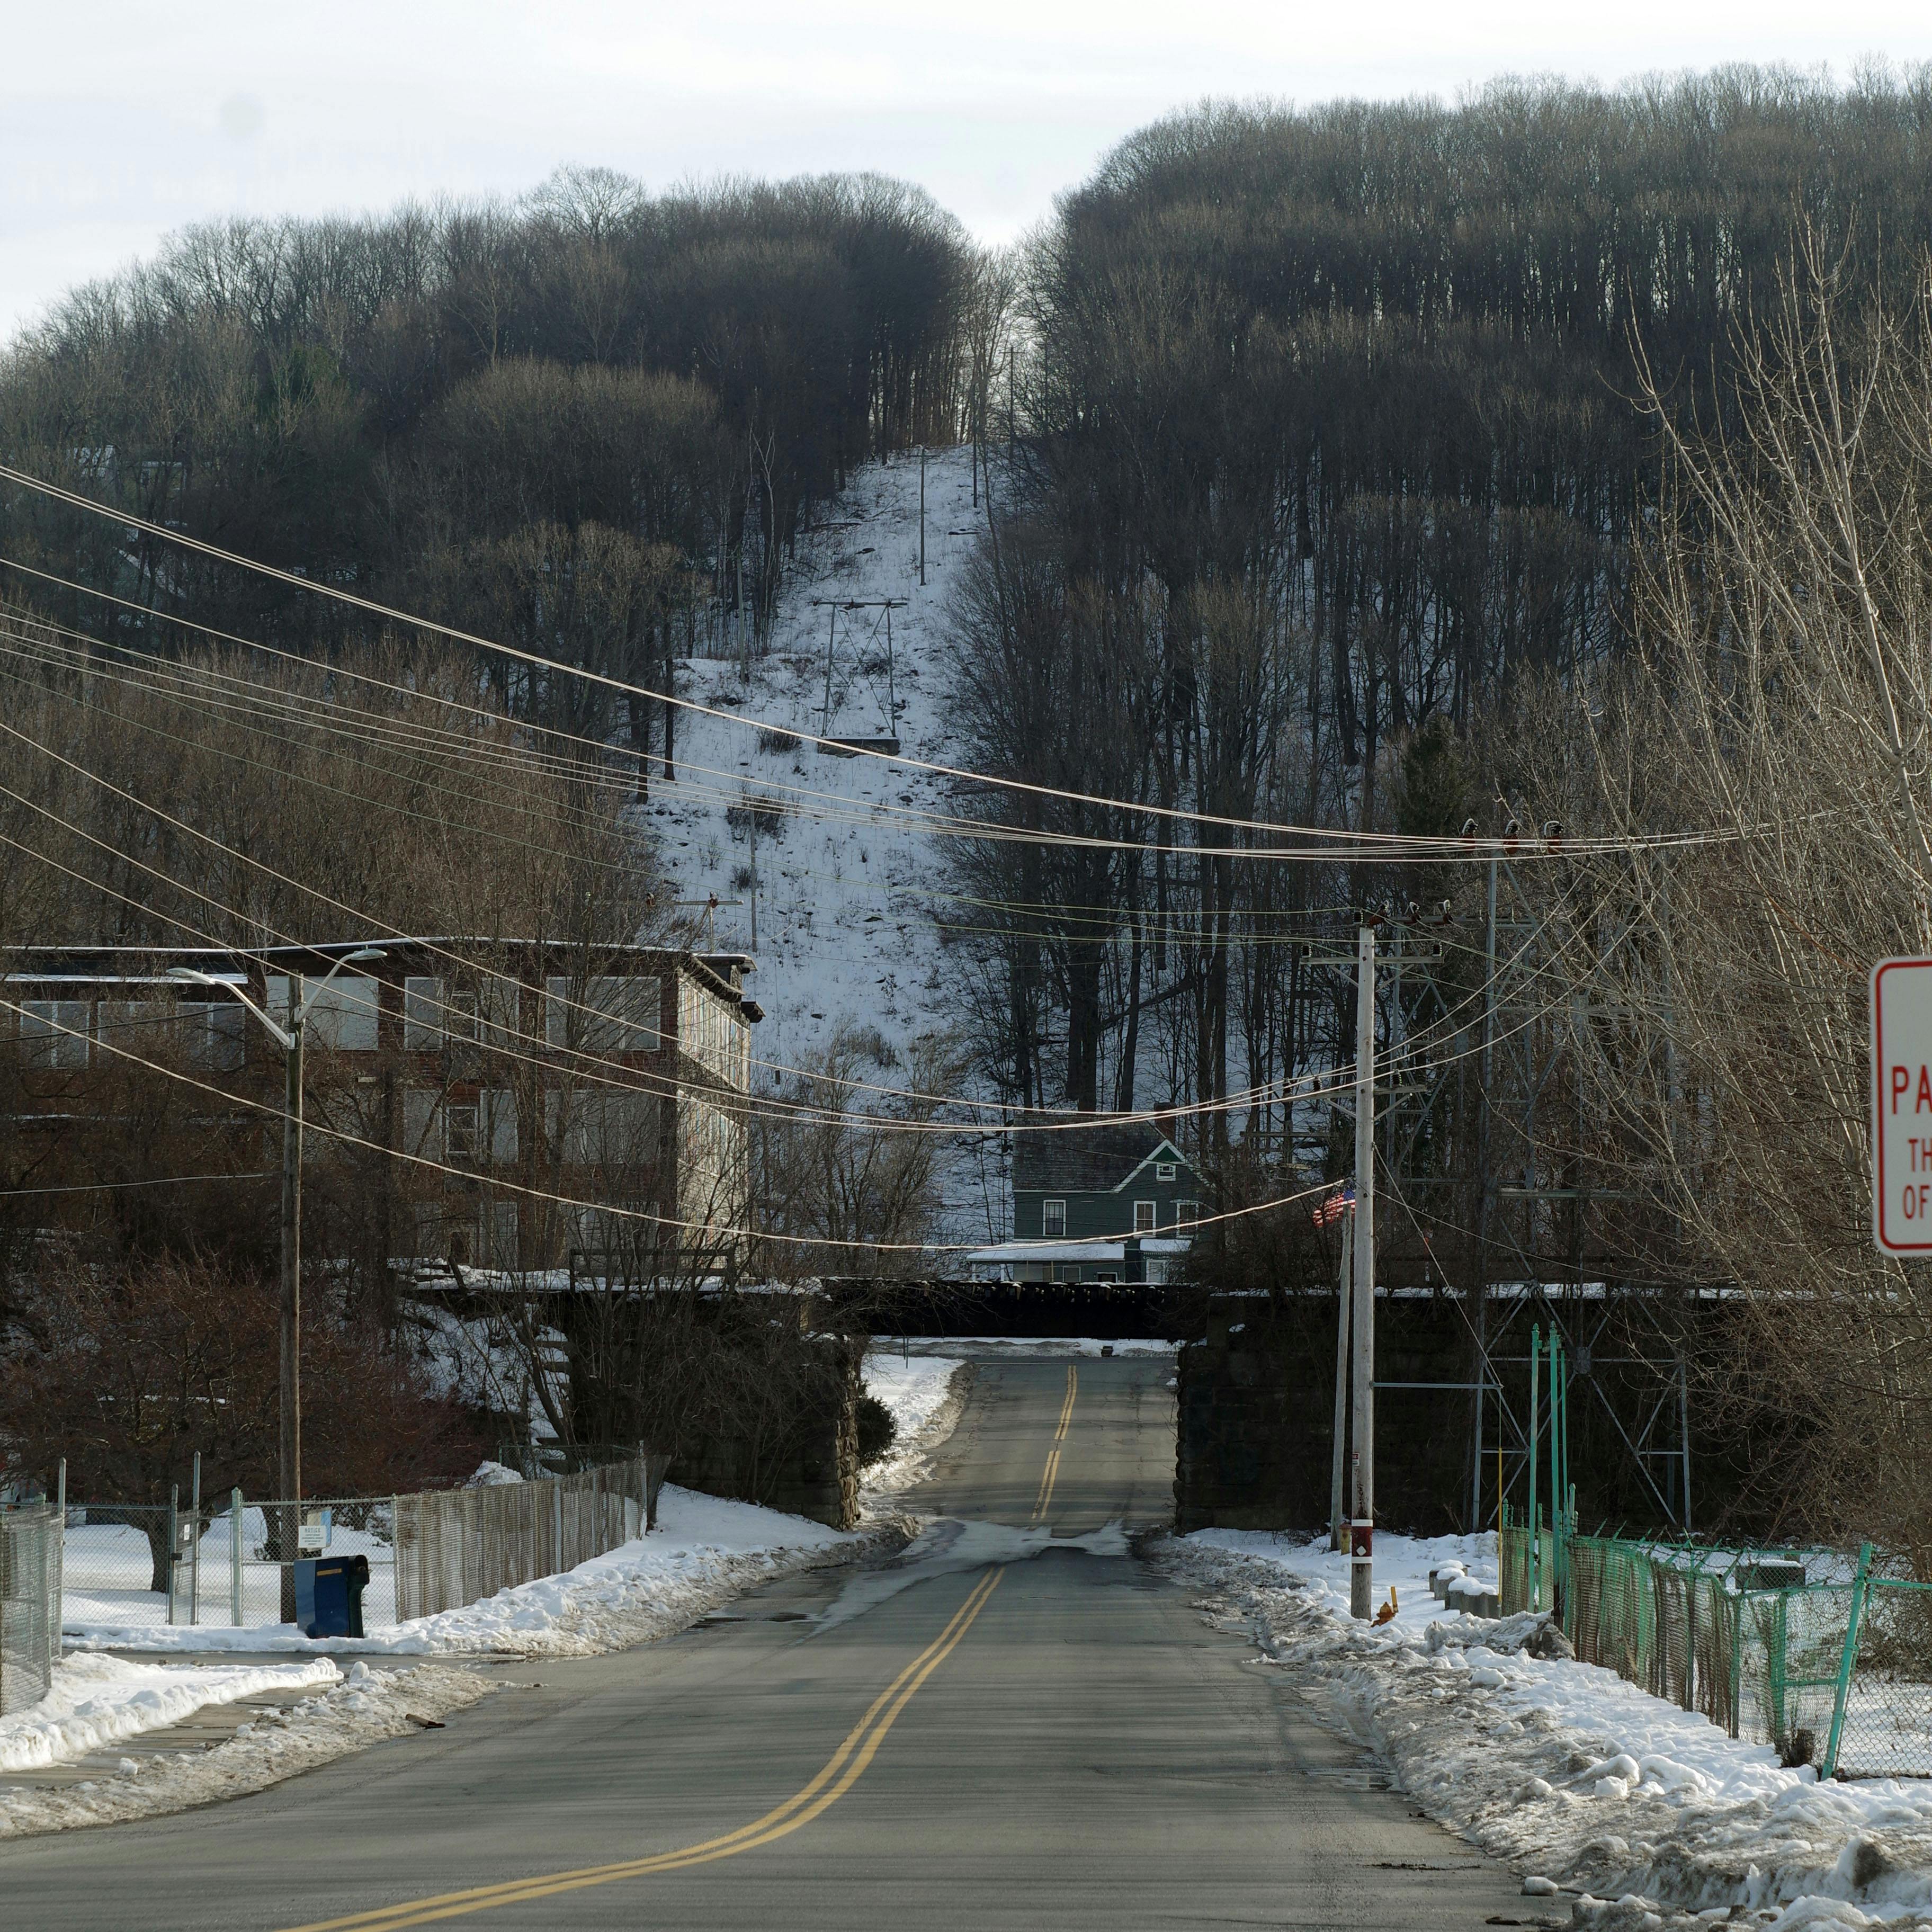 looking down a road, under a railroad bridge, and up at a power line path cut into a hill